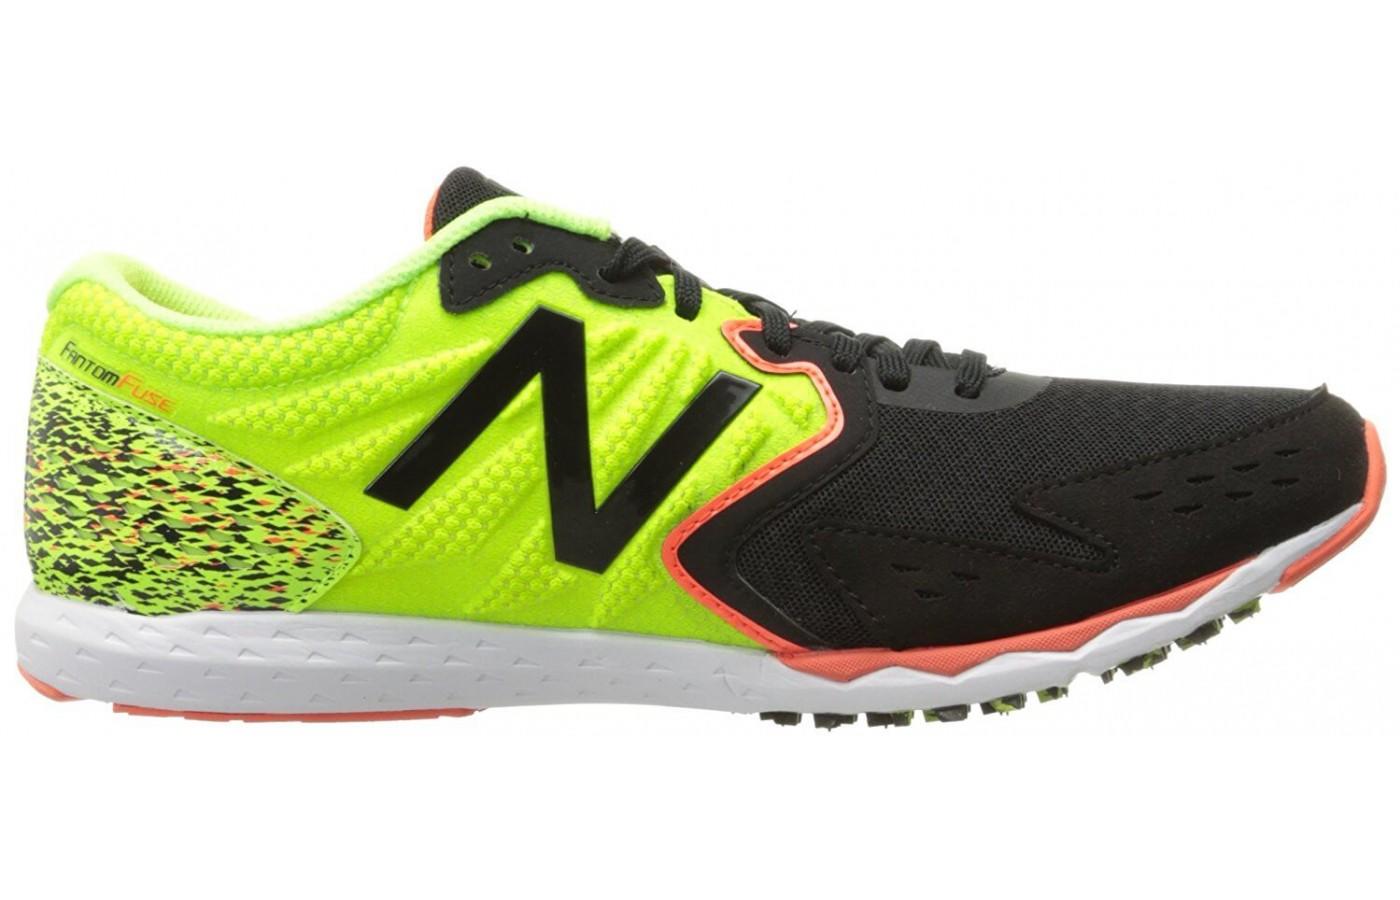 New Balance Hanzo S is a neutral shoe